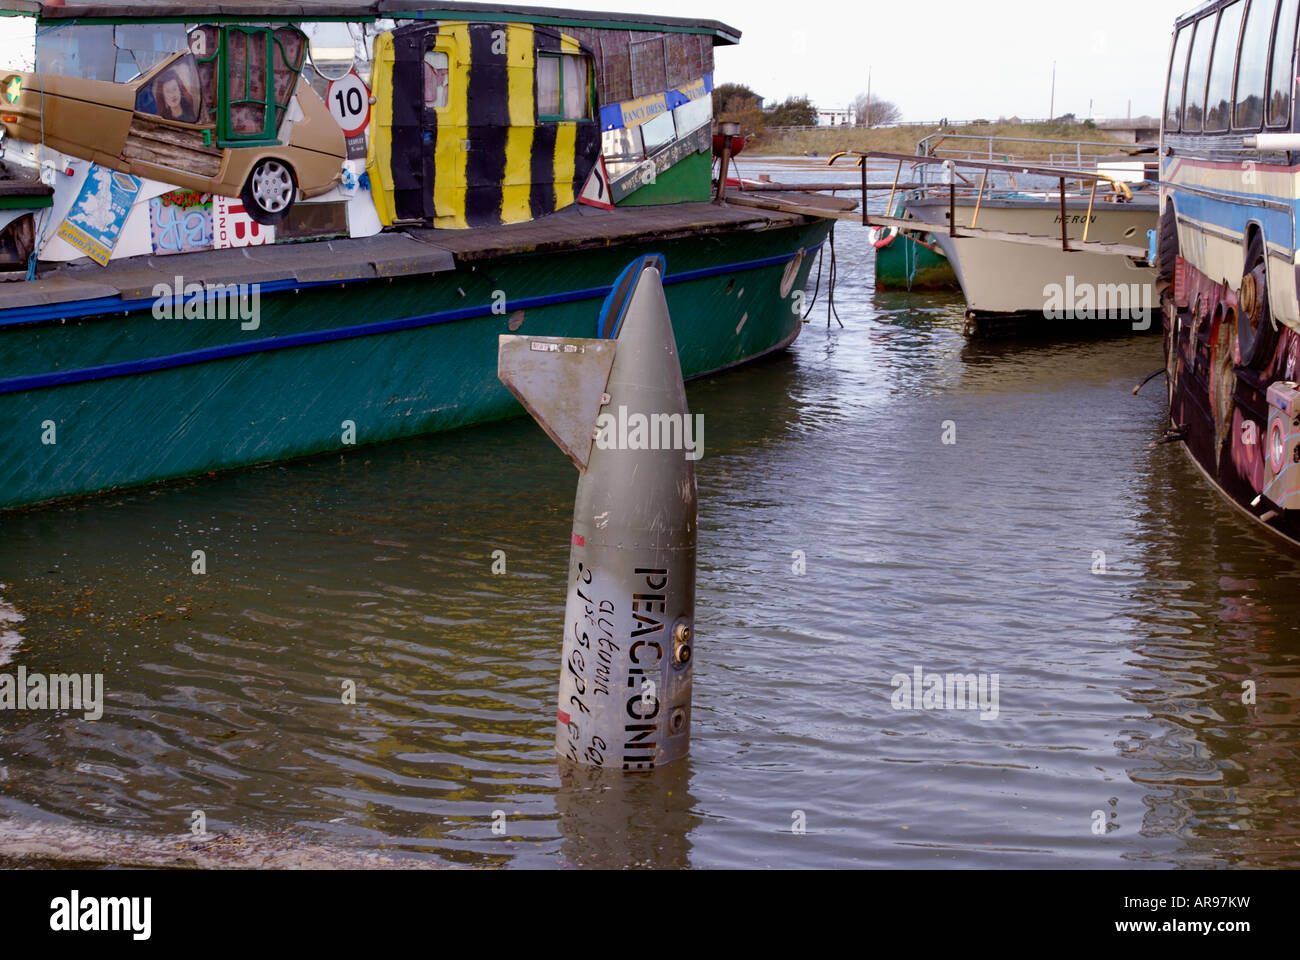 Missile in river amongst artistic houseboats Stock Photo